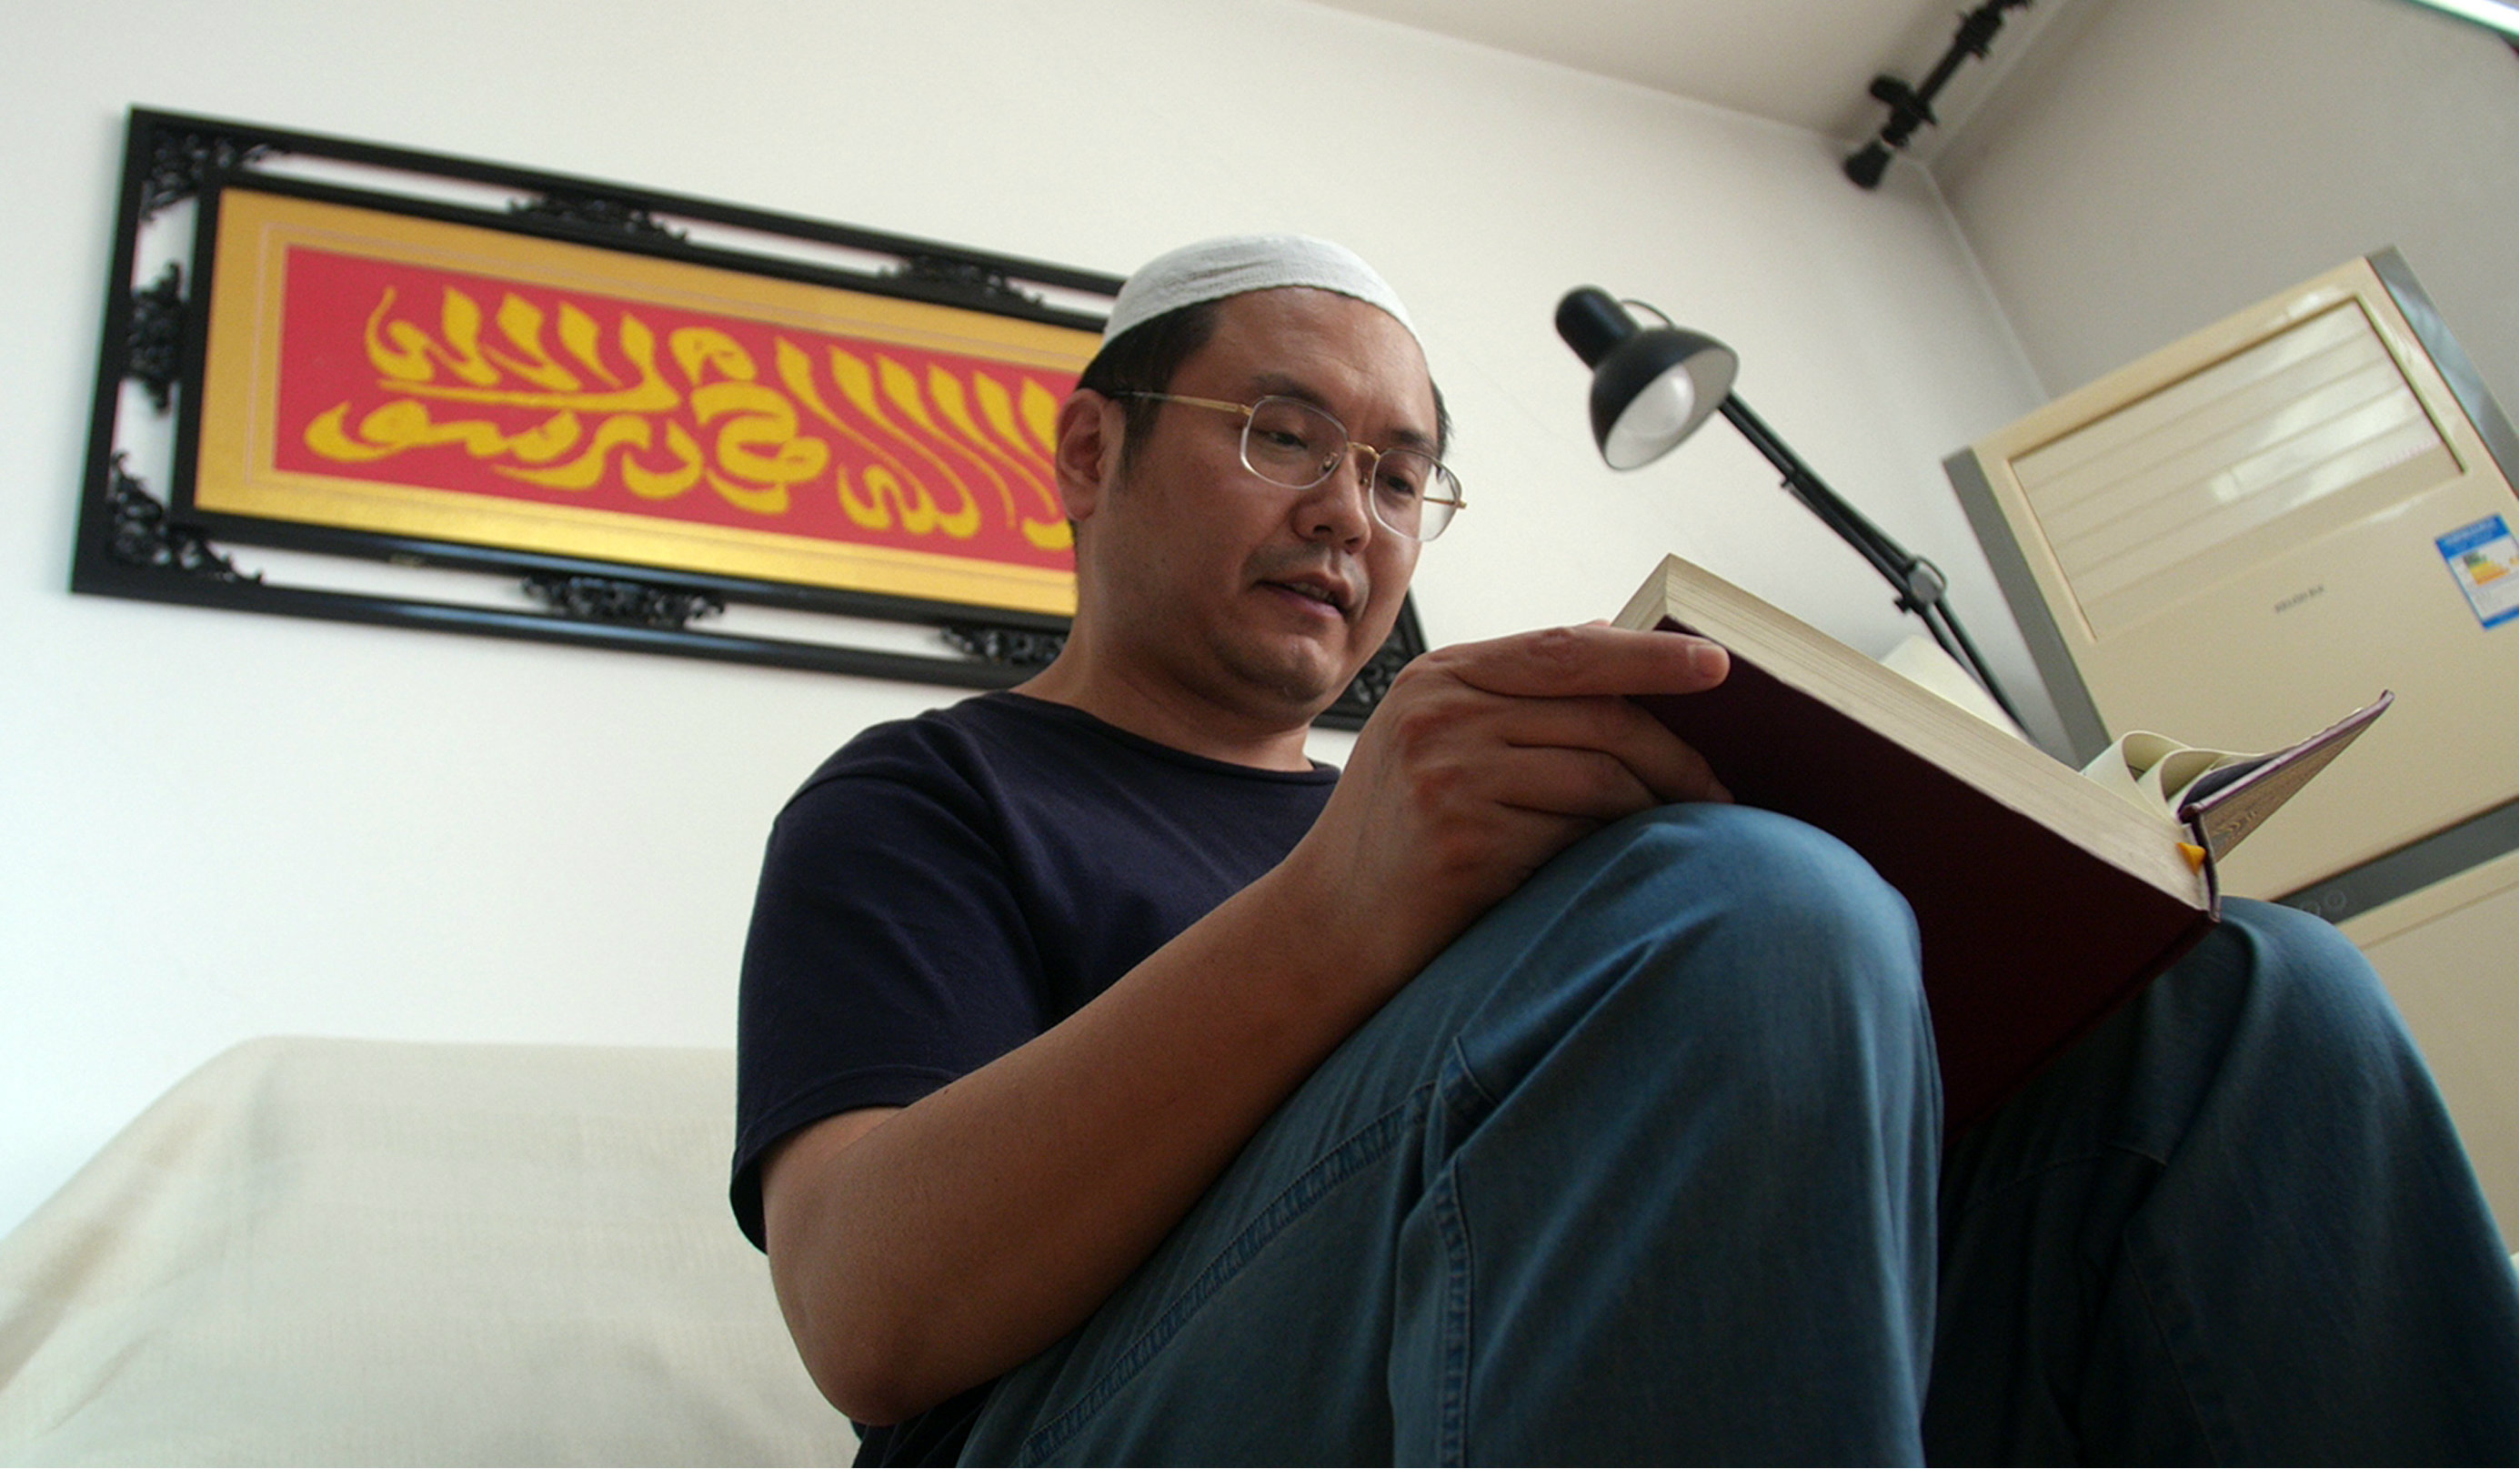 Cui Haoxin reads an Arabic prayer from the Quran in his home in Jinan in China's eastern province of Shandong. Behind him is a tapestry woven by his mother, which reads in Arabic: 